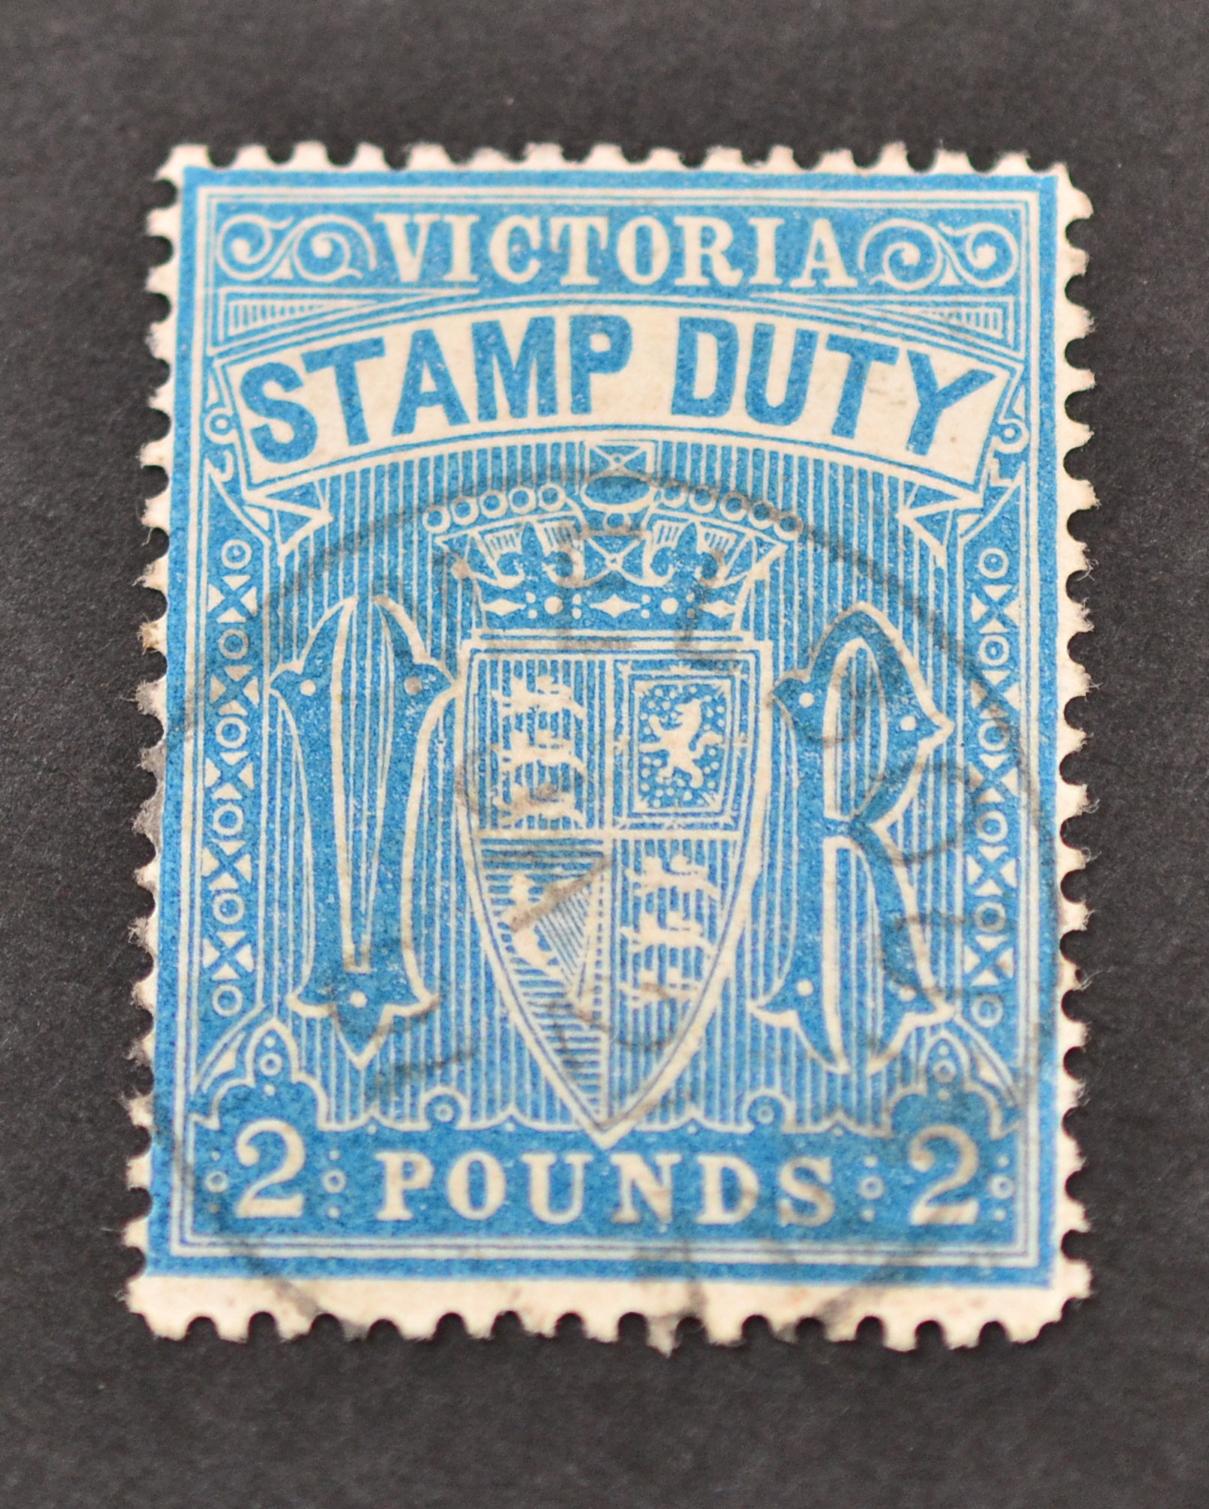 Australia - Victoria. 1884 to 1896 Stamp Duty £2 blue, perf 12 1/2, very fine used with Melbourne Ja